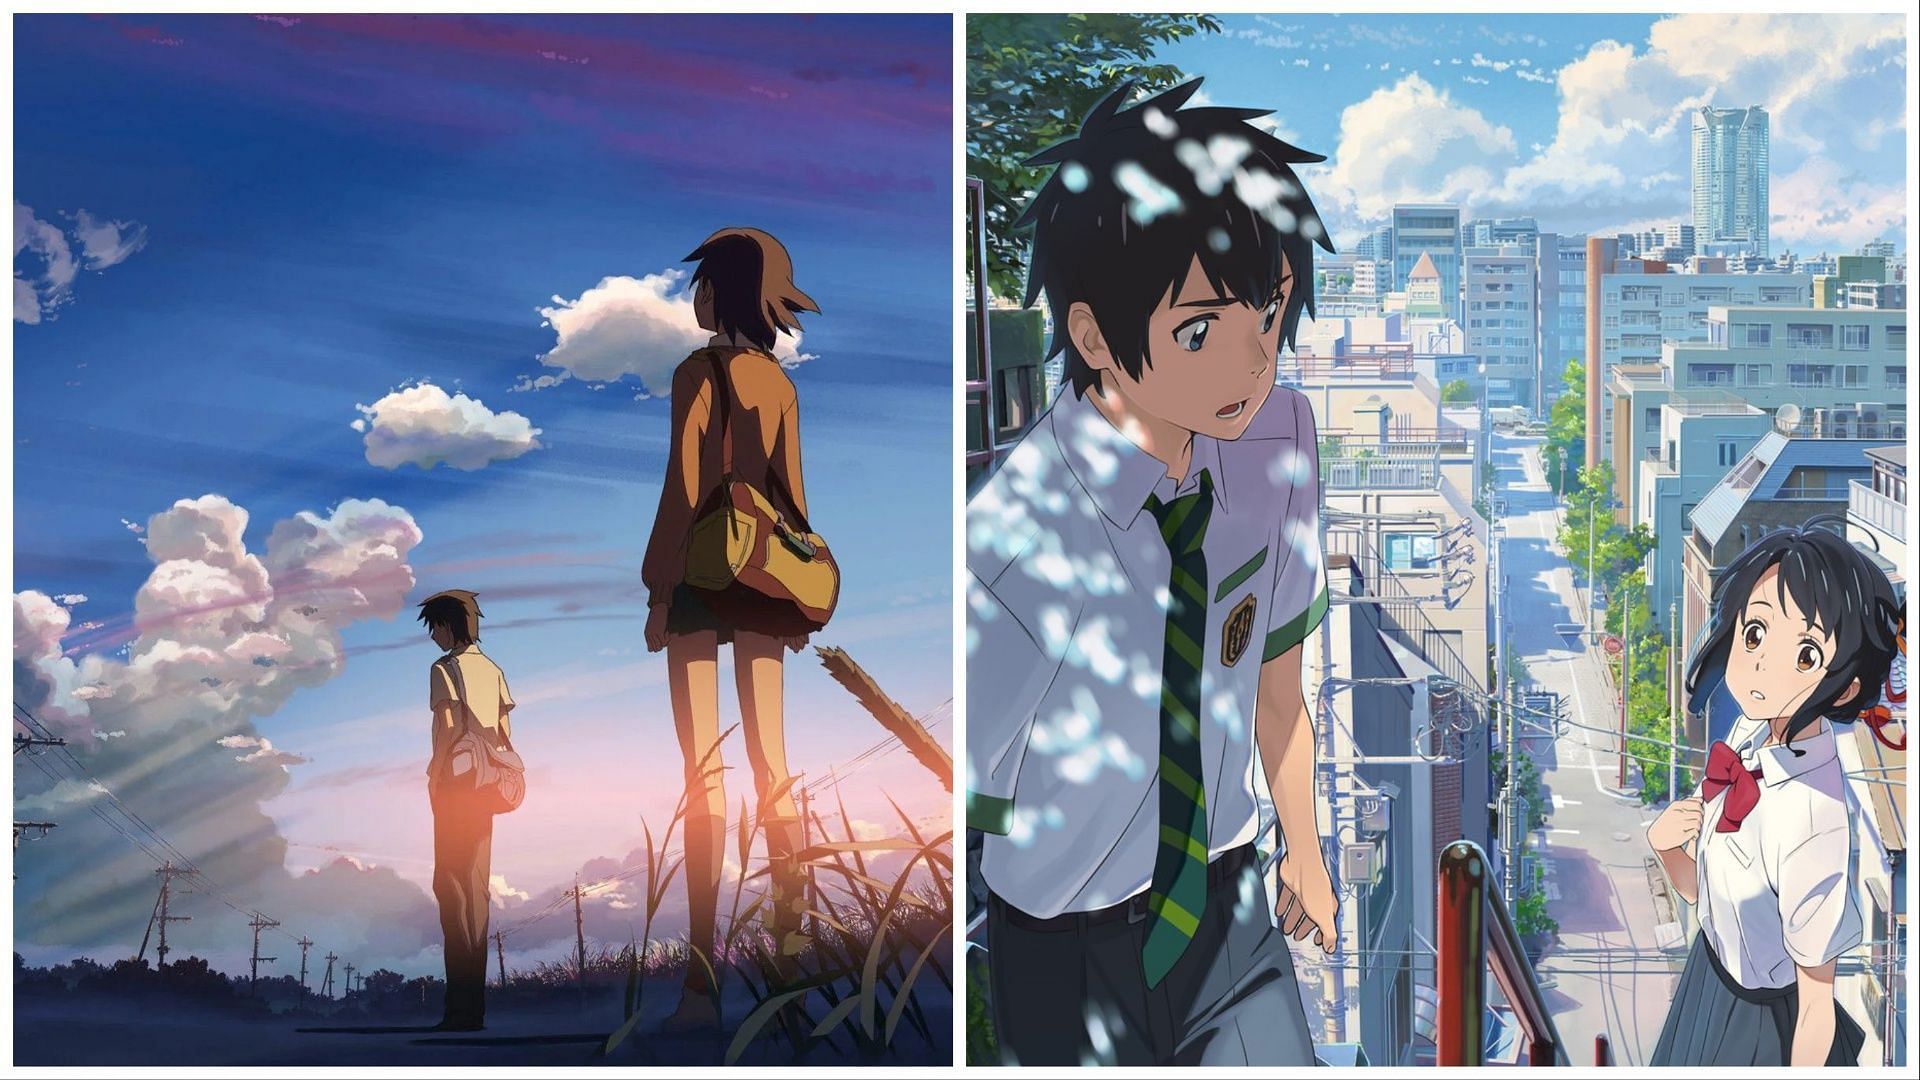 Makoto Shinkai interview: how Your Name restored director's faith in movies